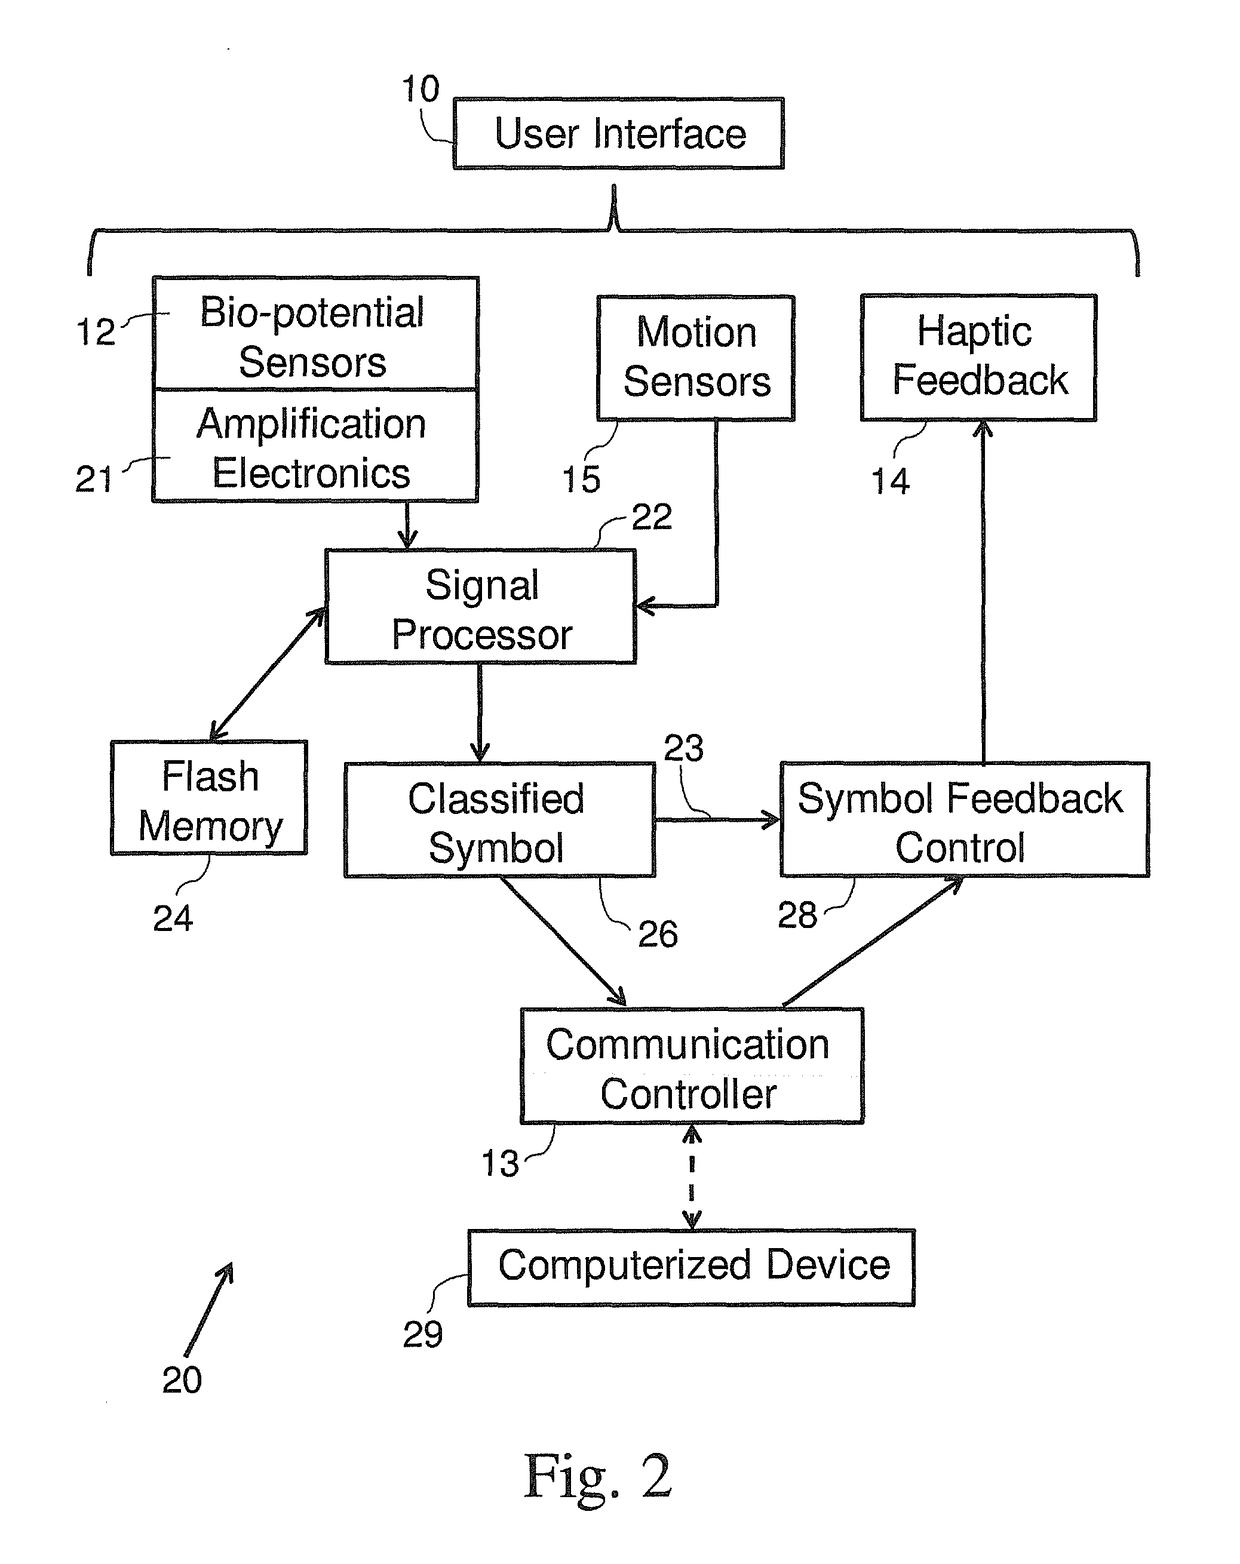 Method and apparatus for a gesture controlled interface for wearable devices